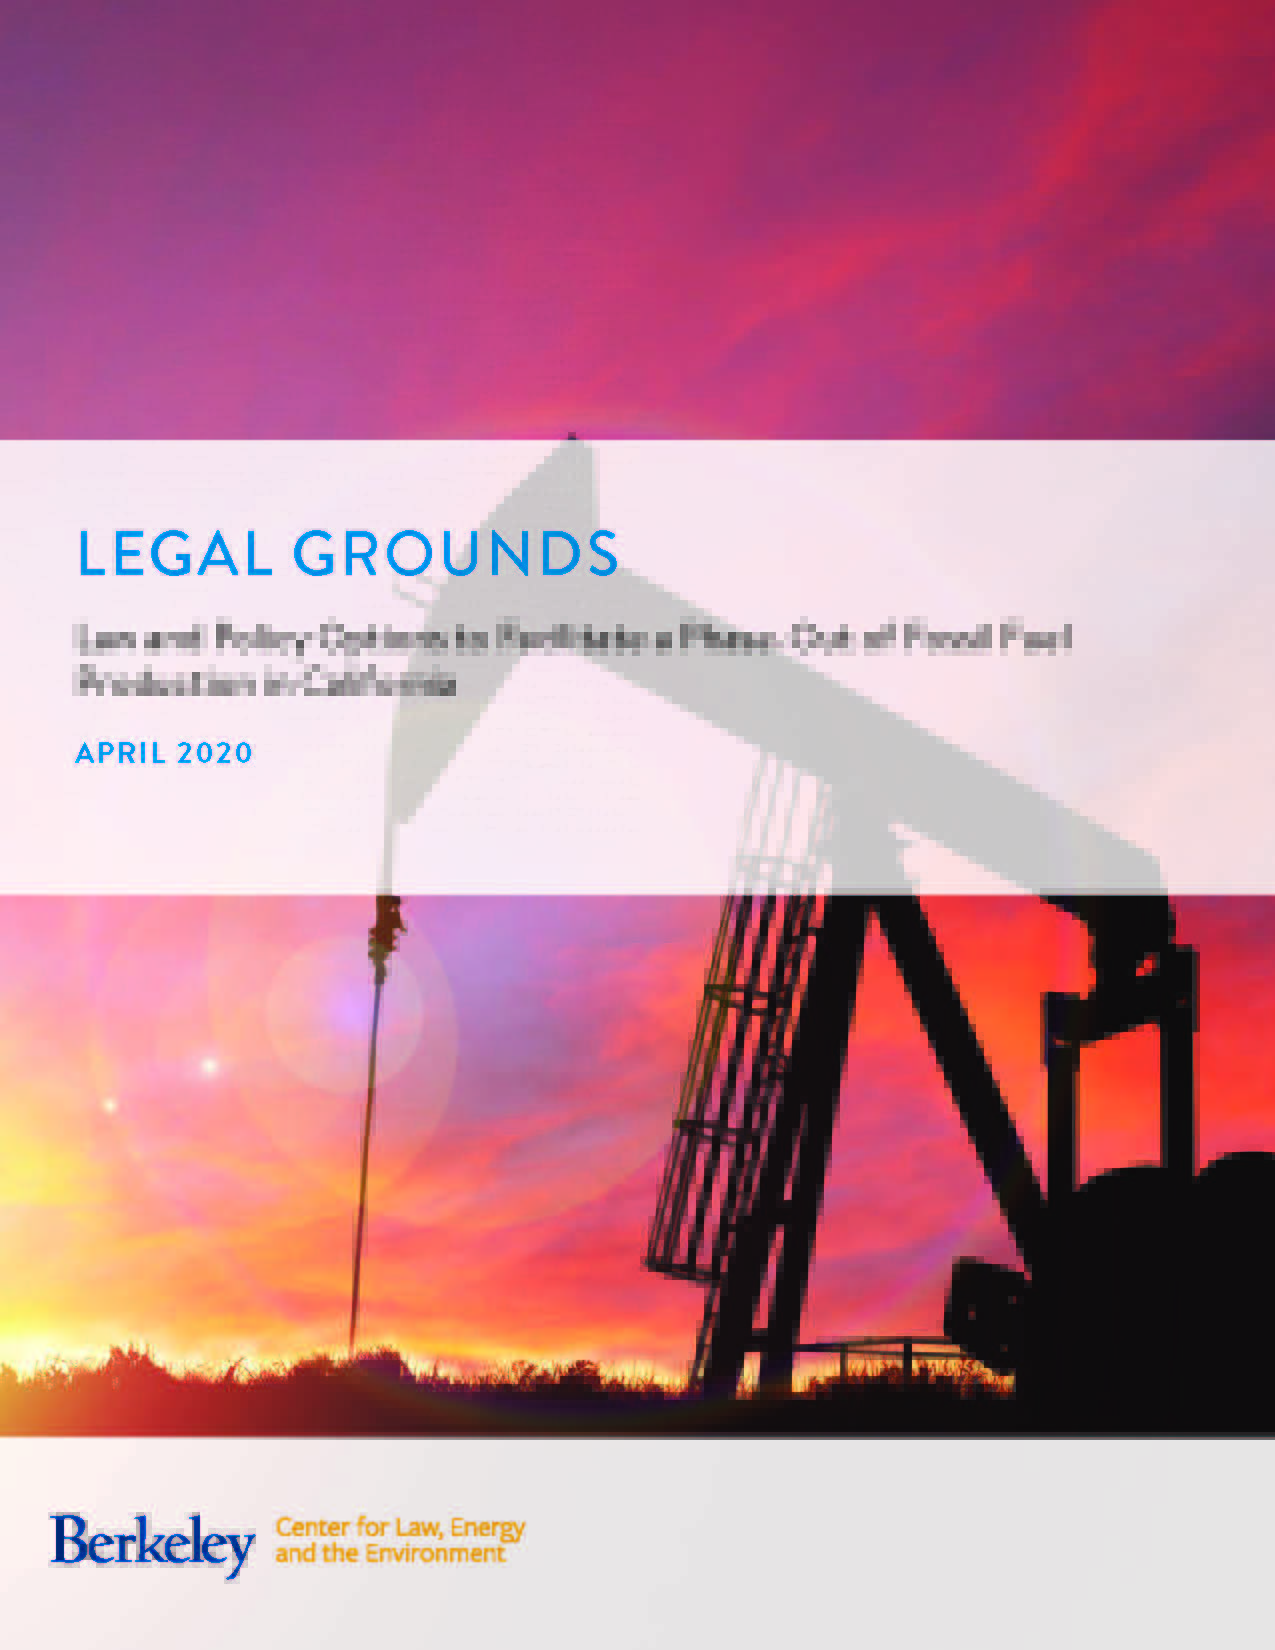 View Legal Grounds: Law and Policy Options to Facilitate a Phase-out of Fossil Fuel Production in California